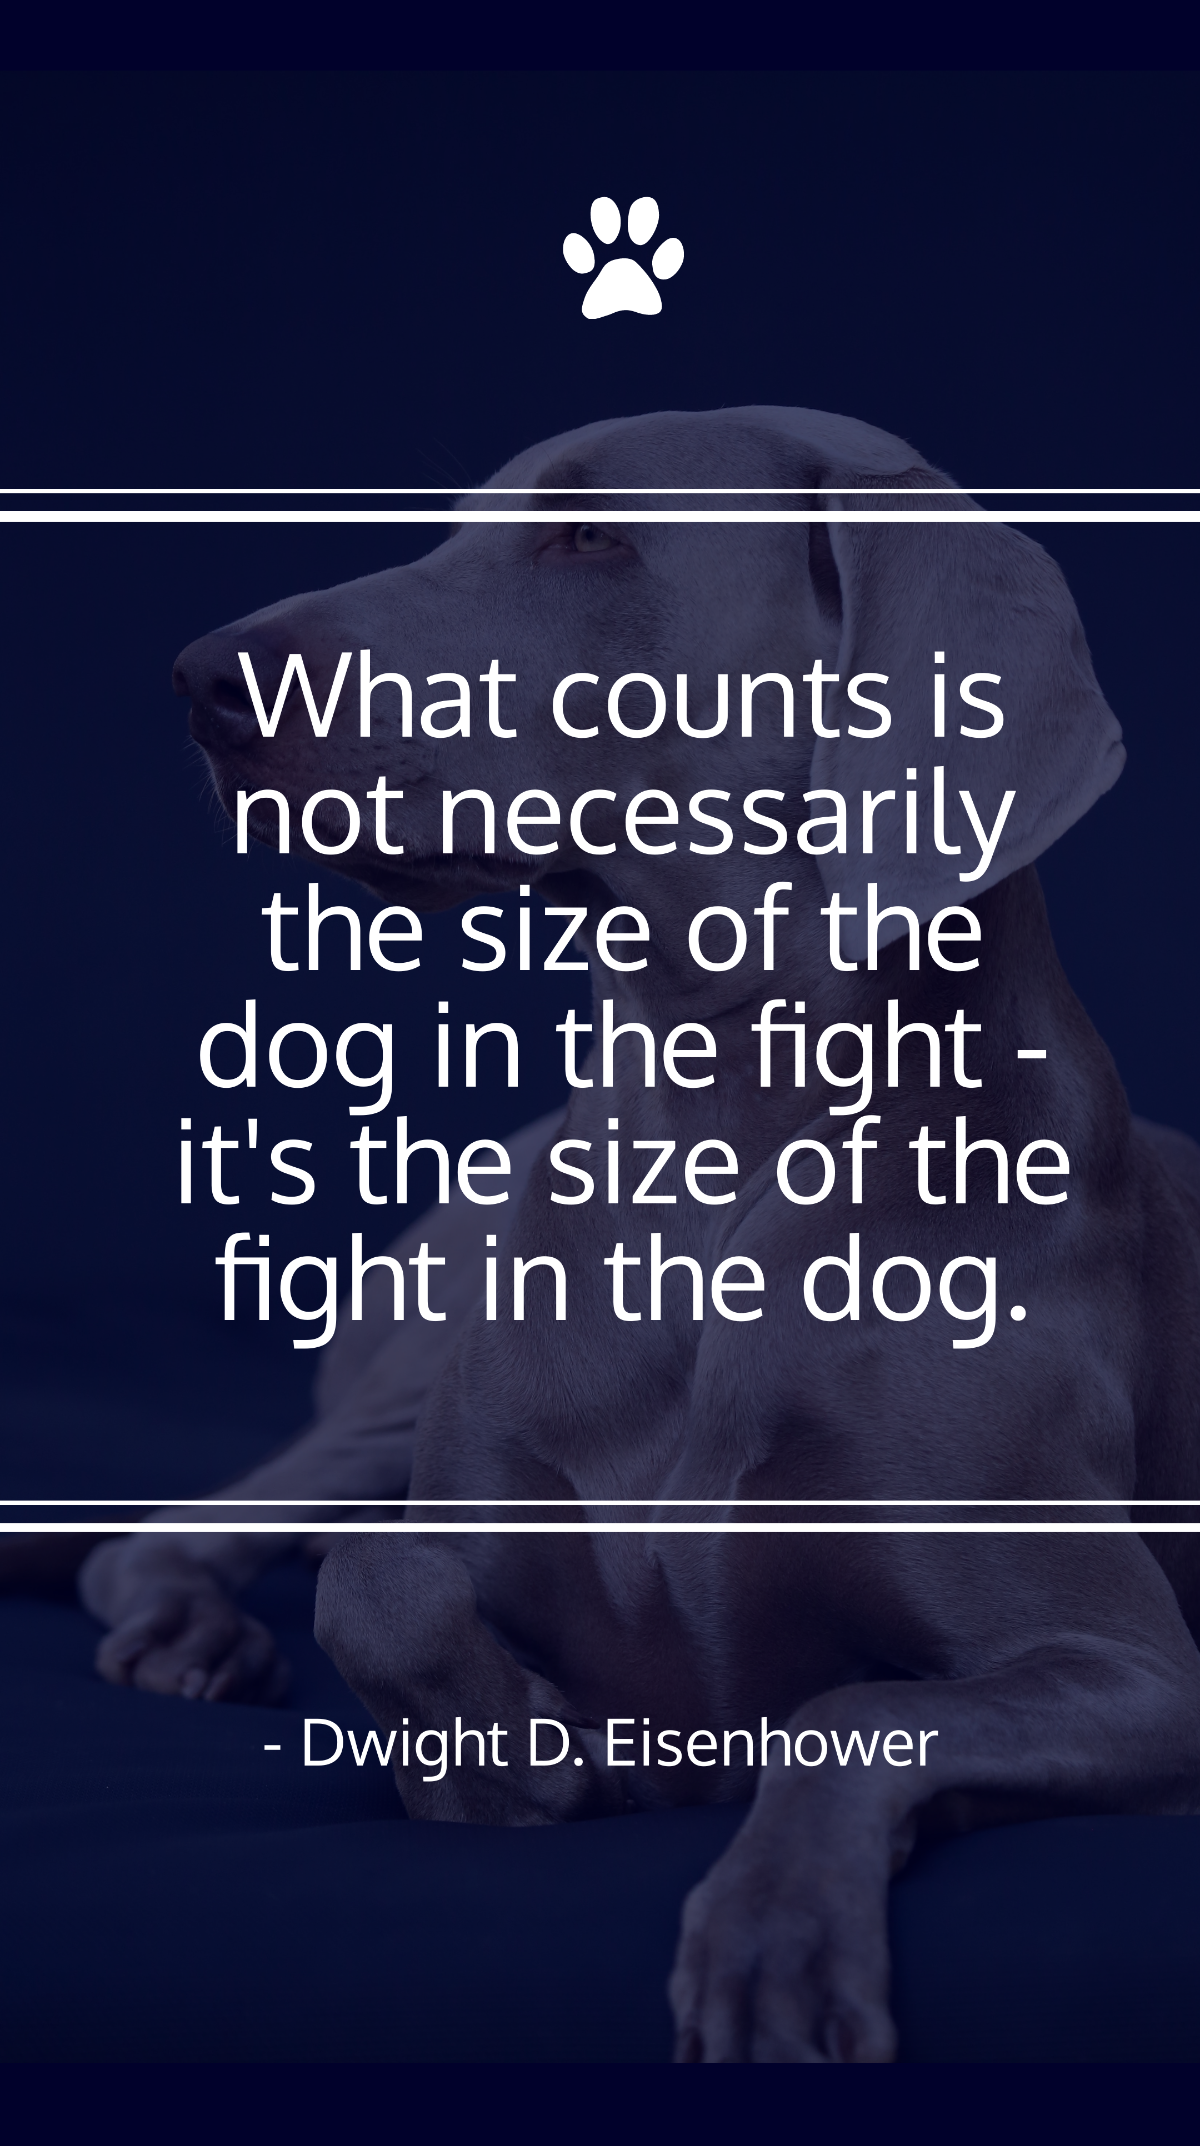 Free Dwight D. Eisenhower - What counts is not necessarily the size of the dog in the fight - it's the size of the fight in the dog. Template